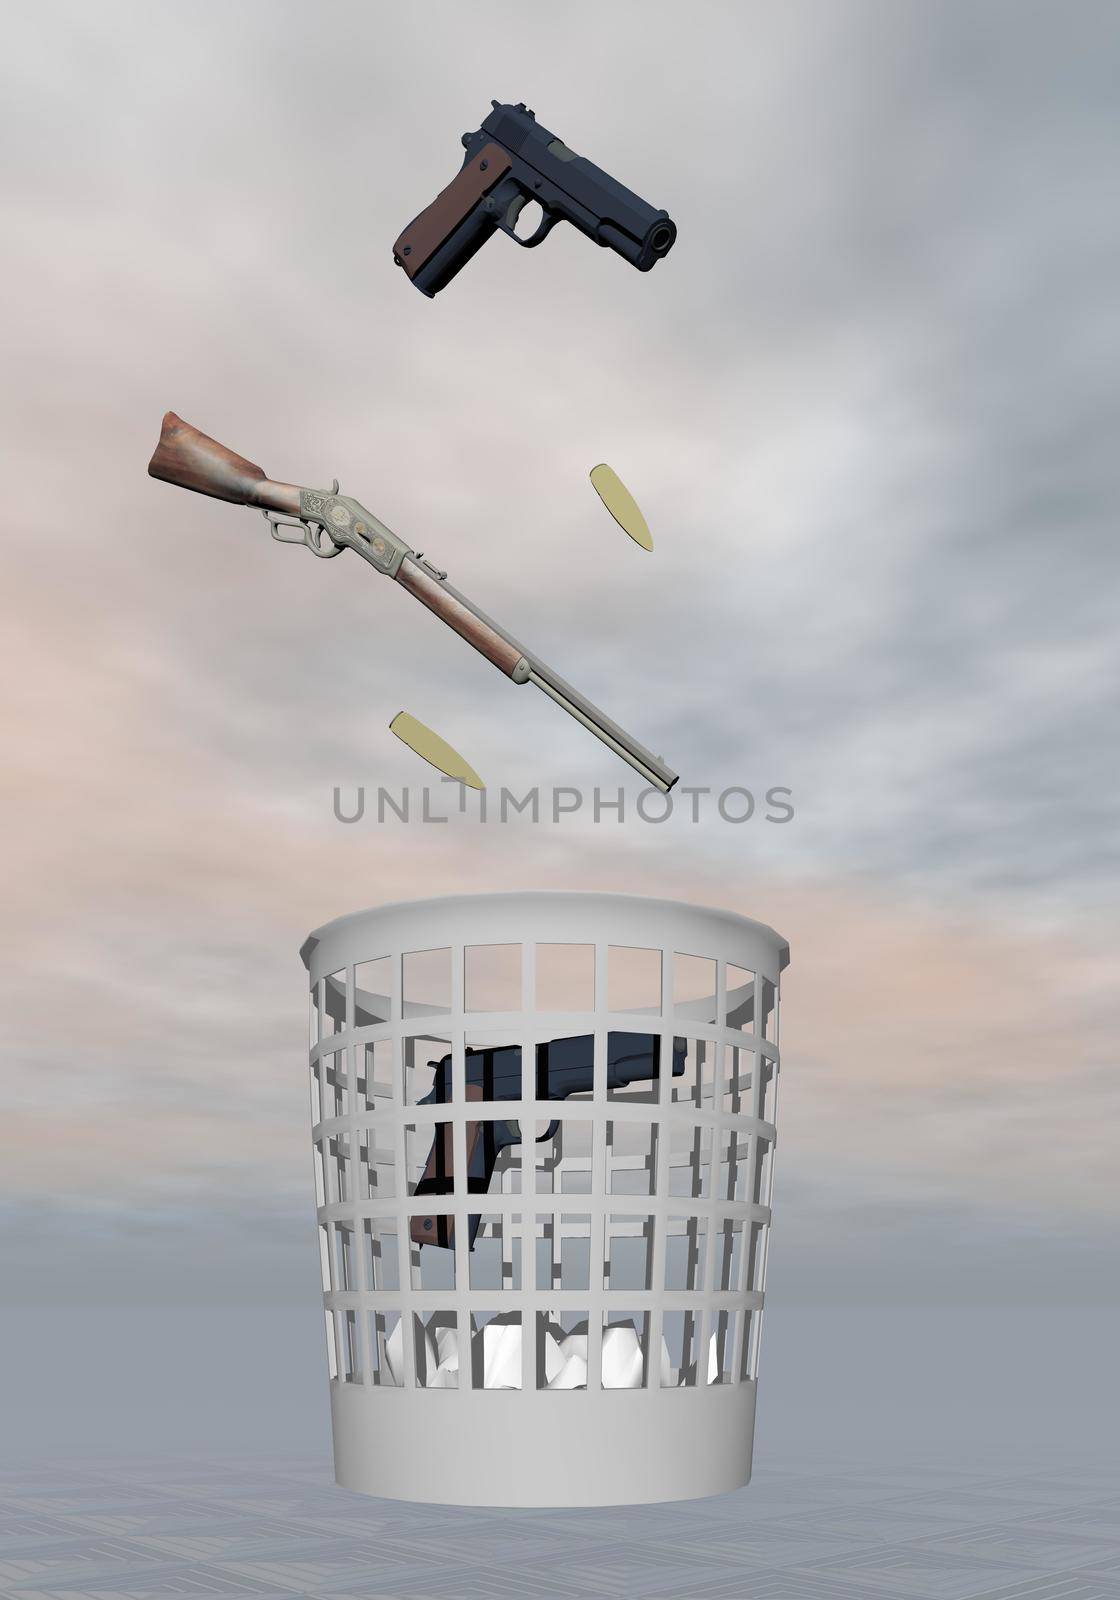 Gun, rifle and bullets thrown to a bin for nonviolent in grey background